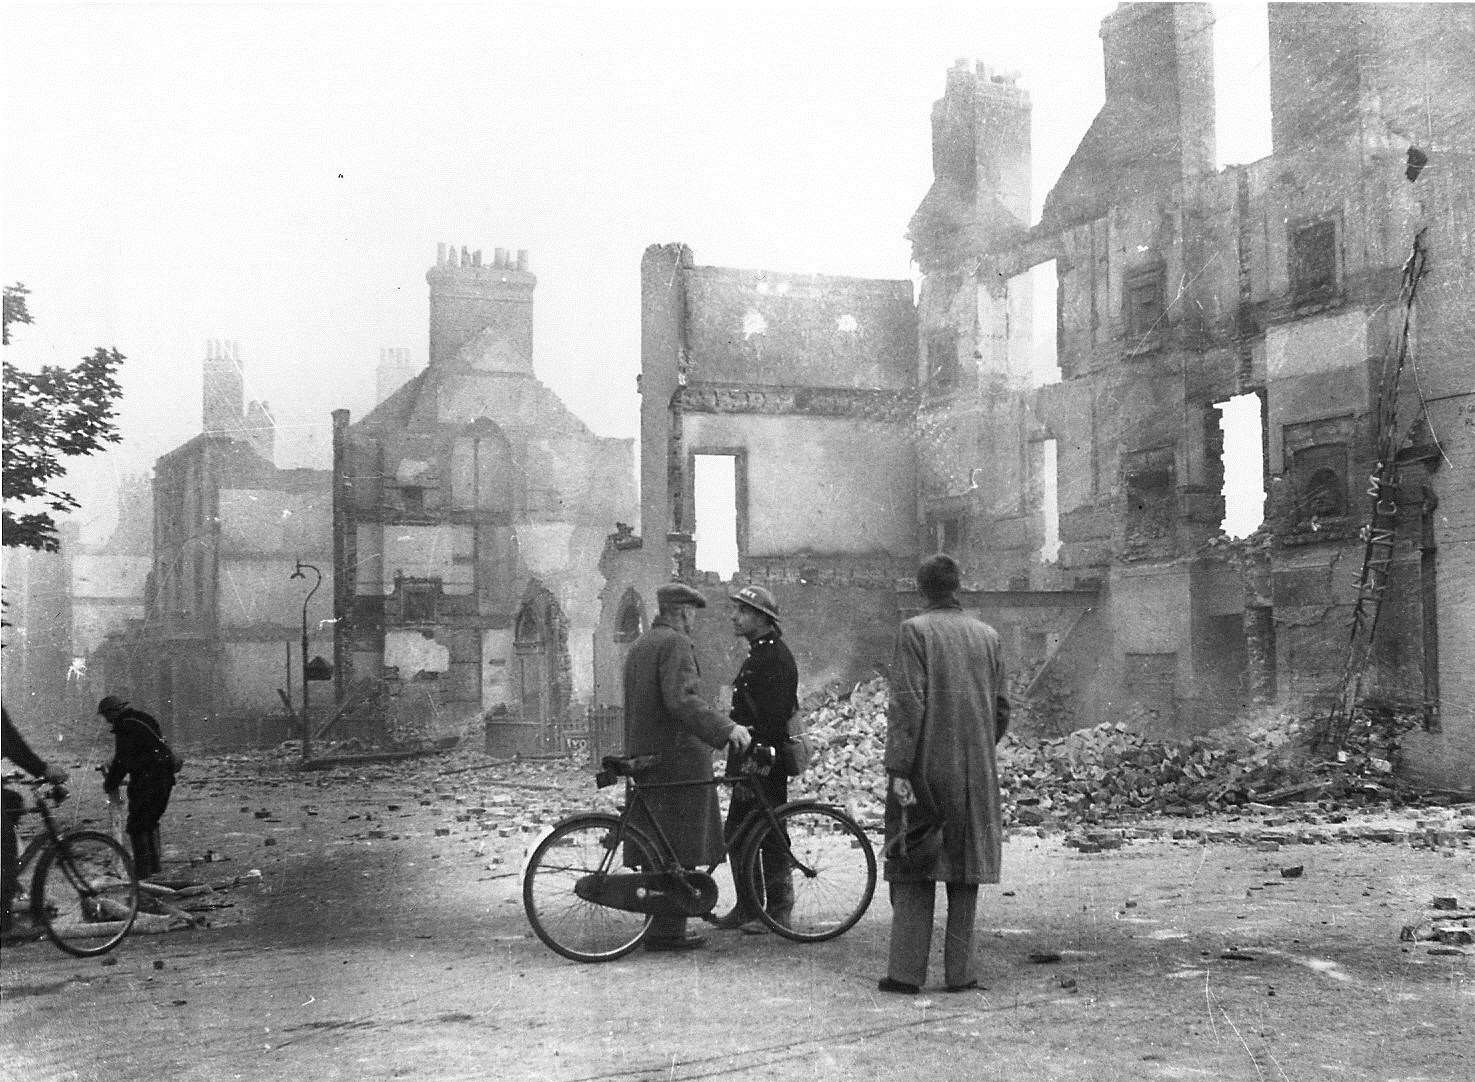 The north side of St. George's Place, in the immediate aftermath of the June 1942 blitz